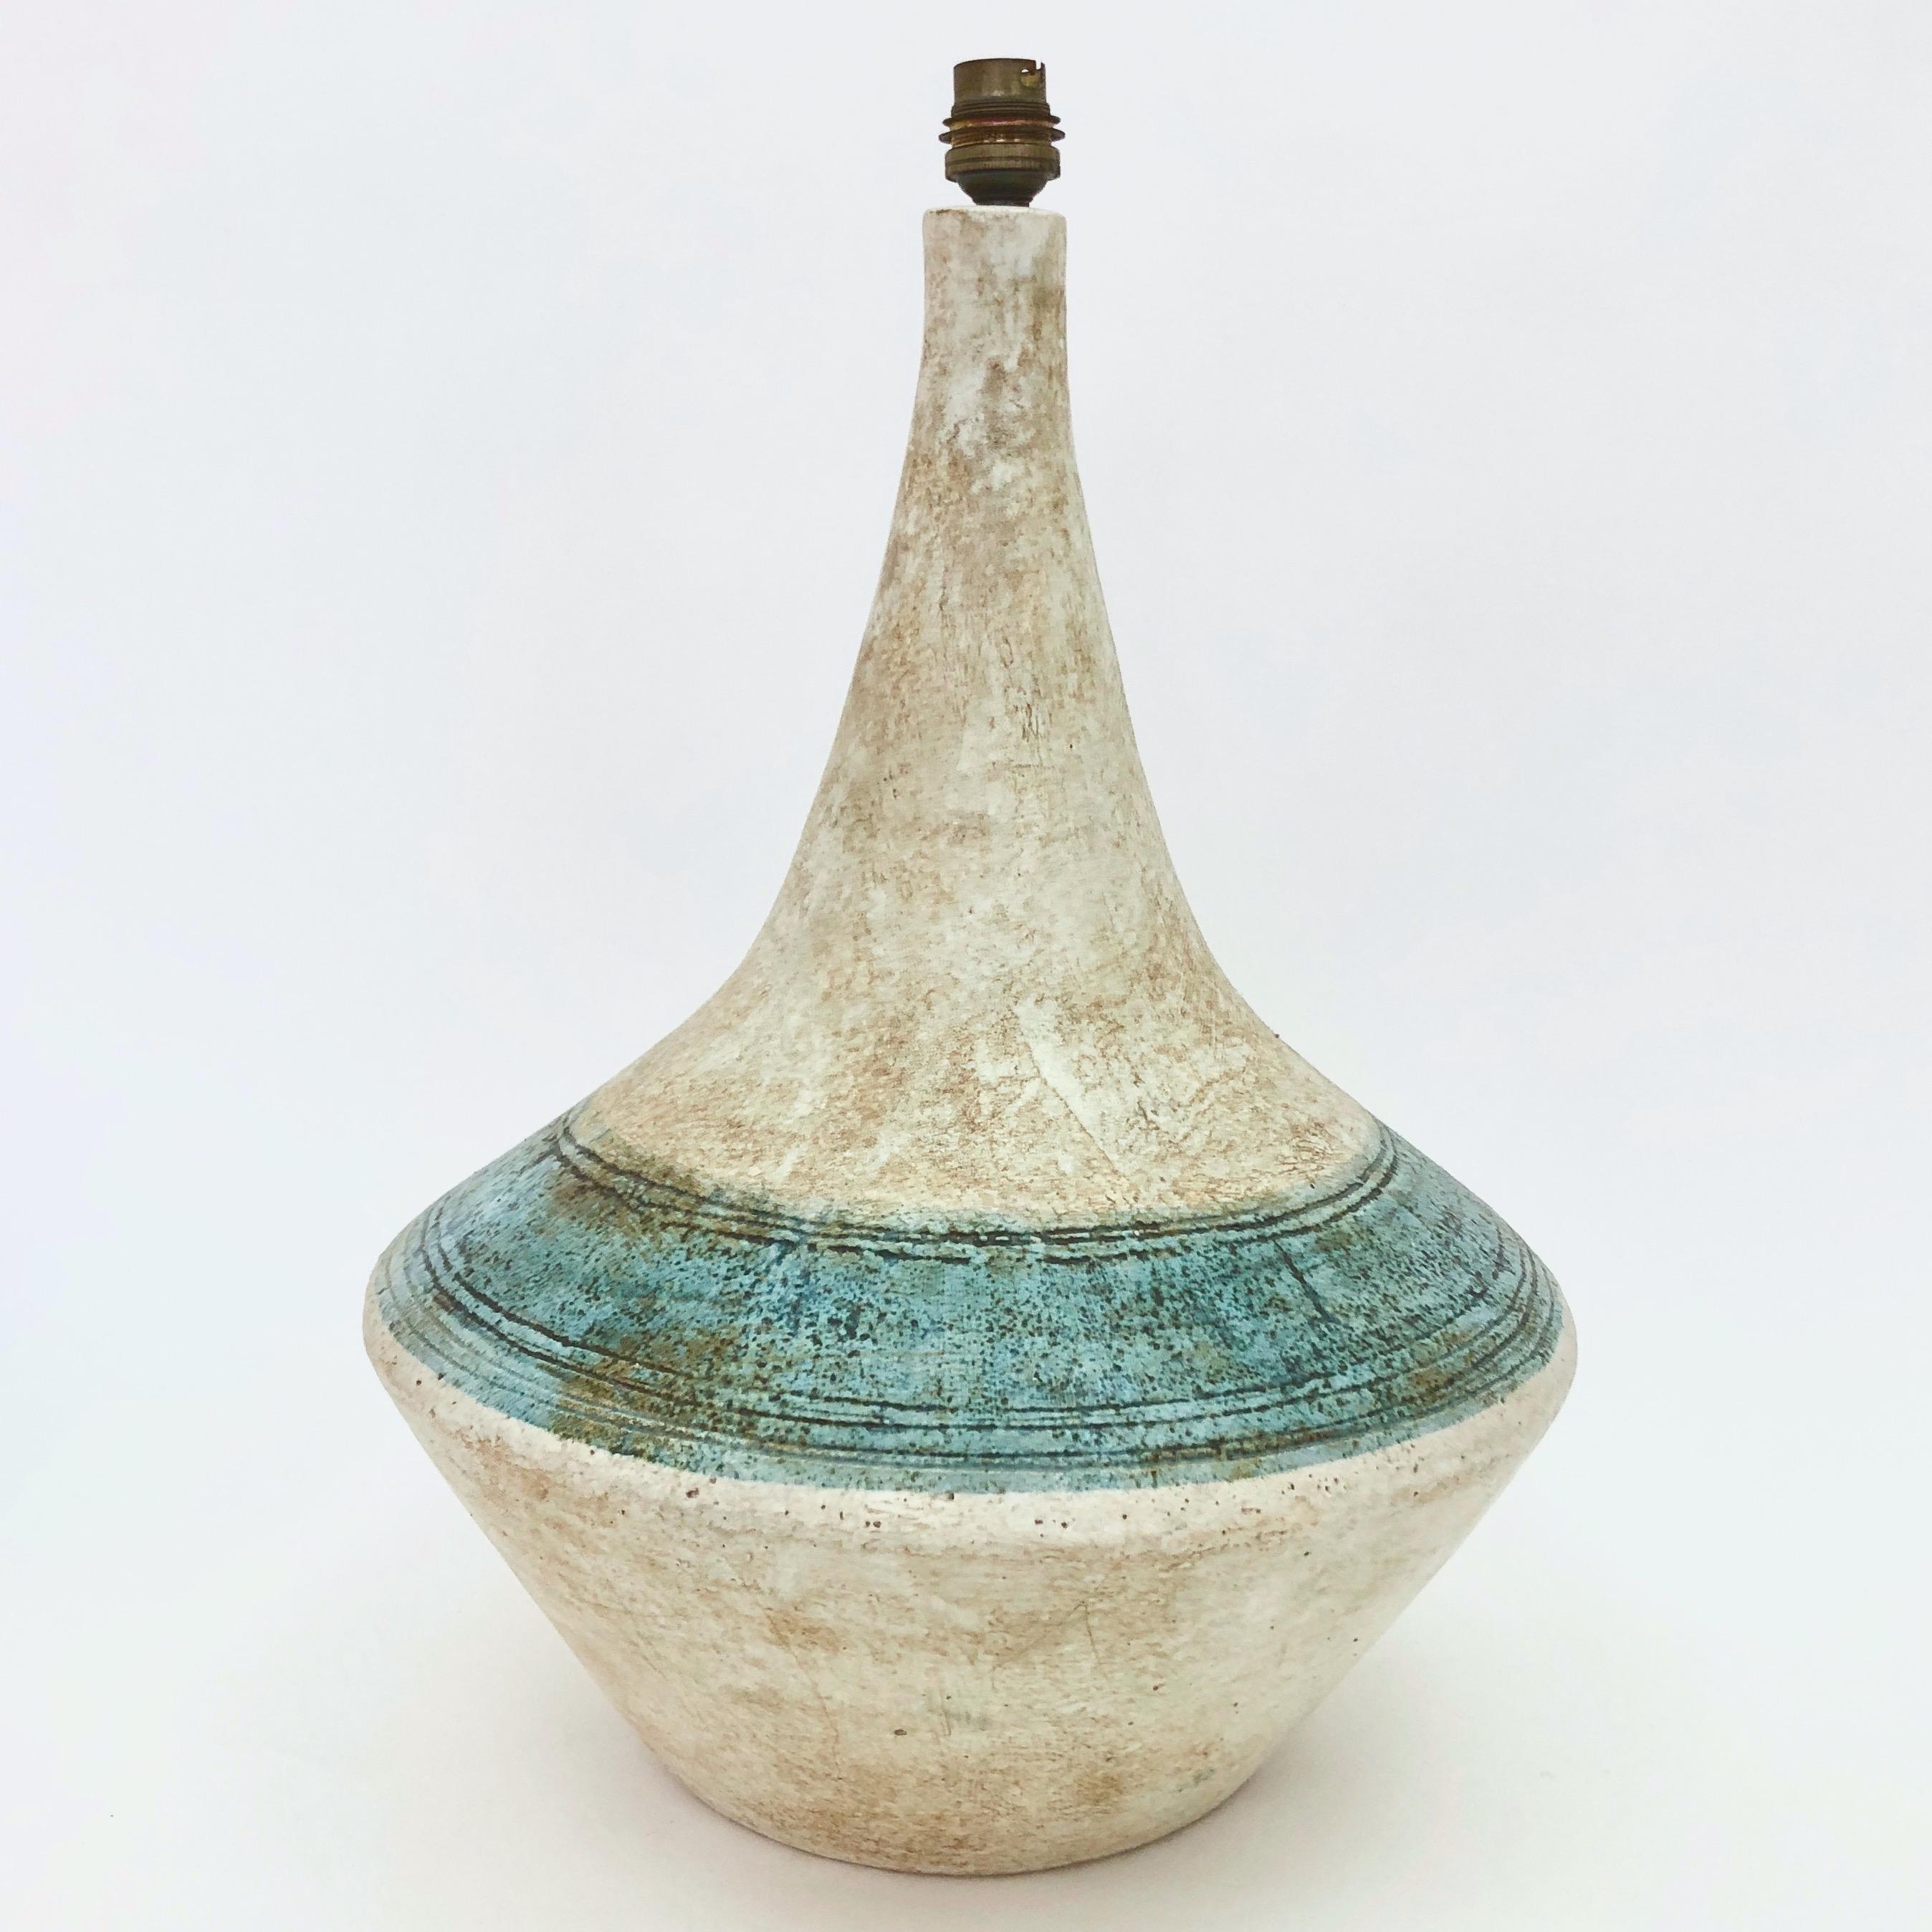 Hand-thrown pottery artwork, forming an important table lamp base.
Ceramic enameled in shades of cloudy pale beige, decorated with circular lines incised around the body and over glazed in mottled turquoise blue. 

Ceramic signed on the bottom by